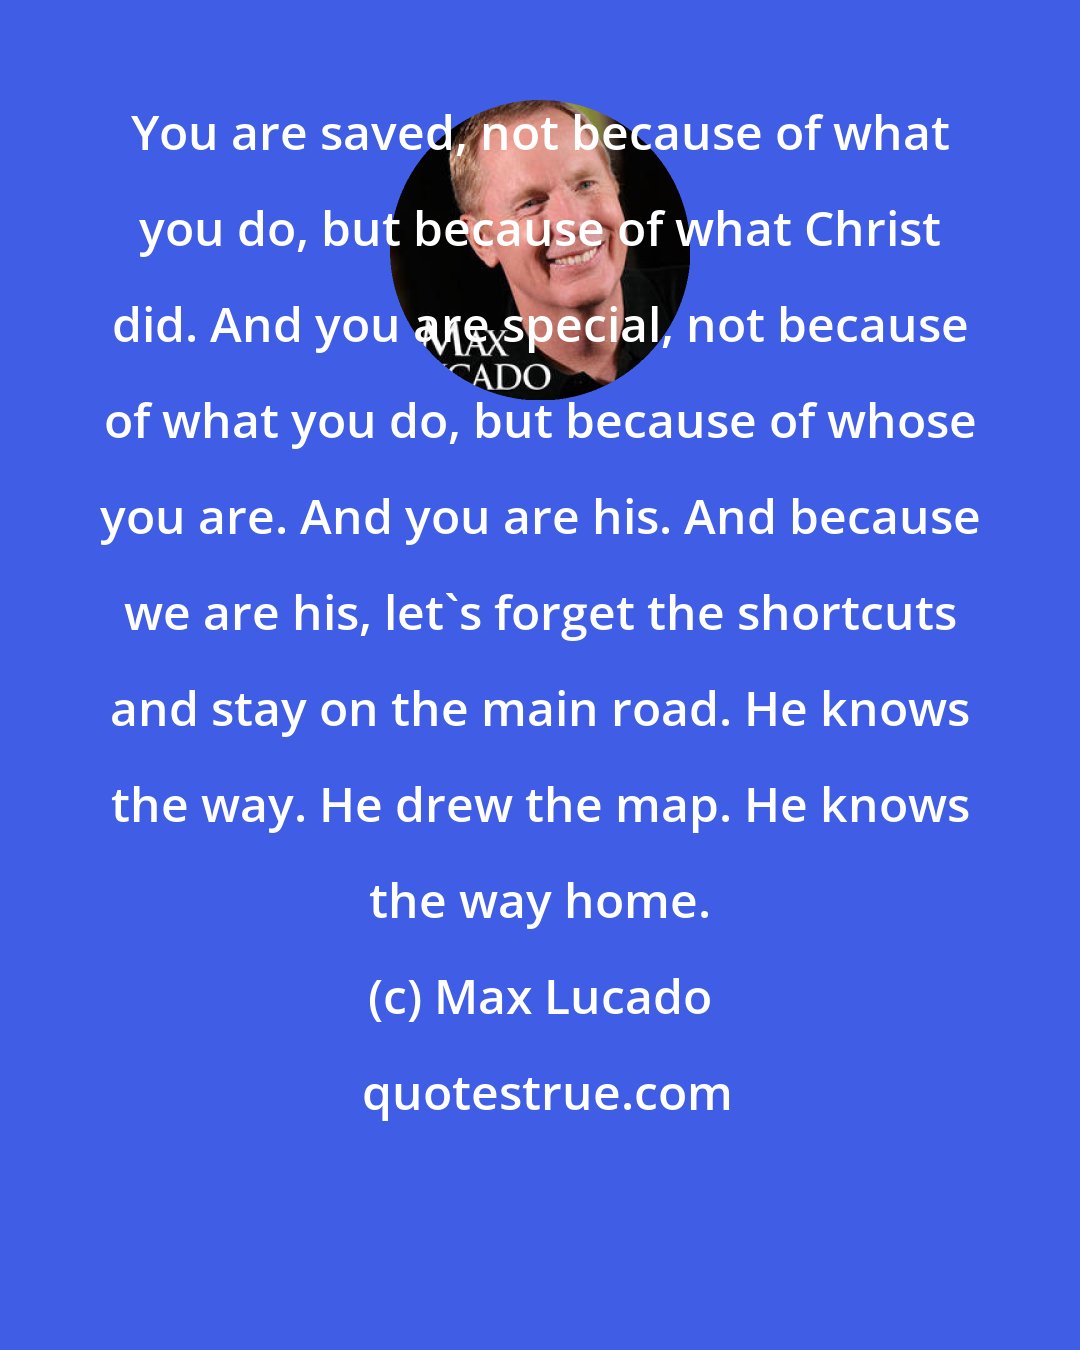 Max Lucado: You are saved, not because of what you do, but because of what Christ did. And you are special, not because of what you do, but because of whose you are. And you are his. And because we are his, let's forget the shortcuts and stay on the main road. He knows the way. He drew the map. He knows the way home.